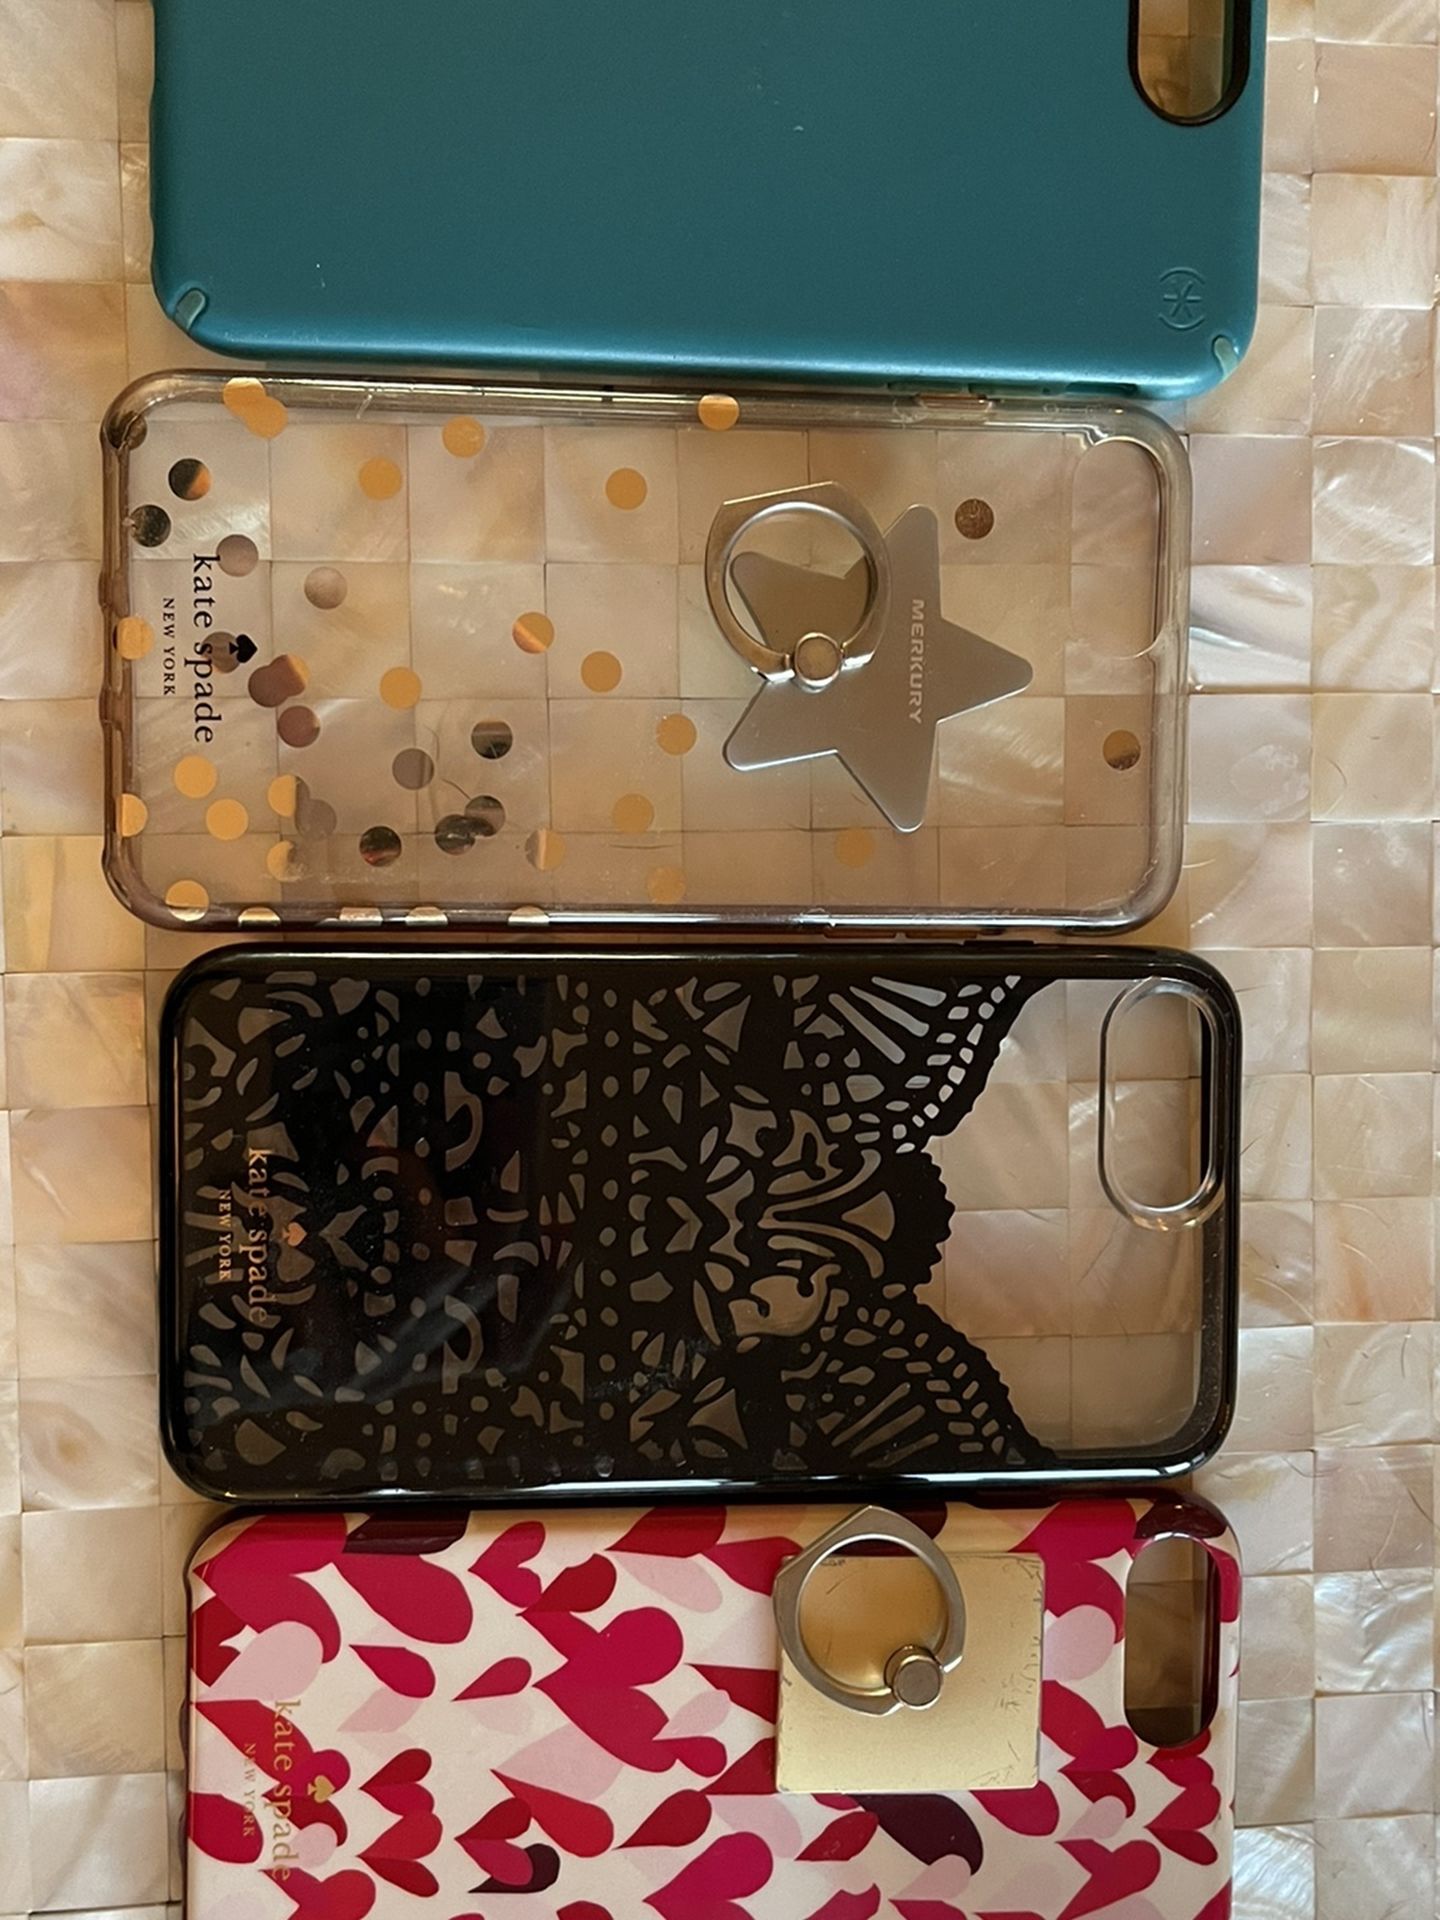 iPhone 6s/7 S/8s Plus Case - 3 Kate Spade And One Incipio